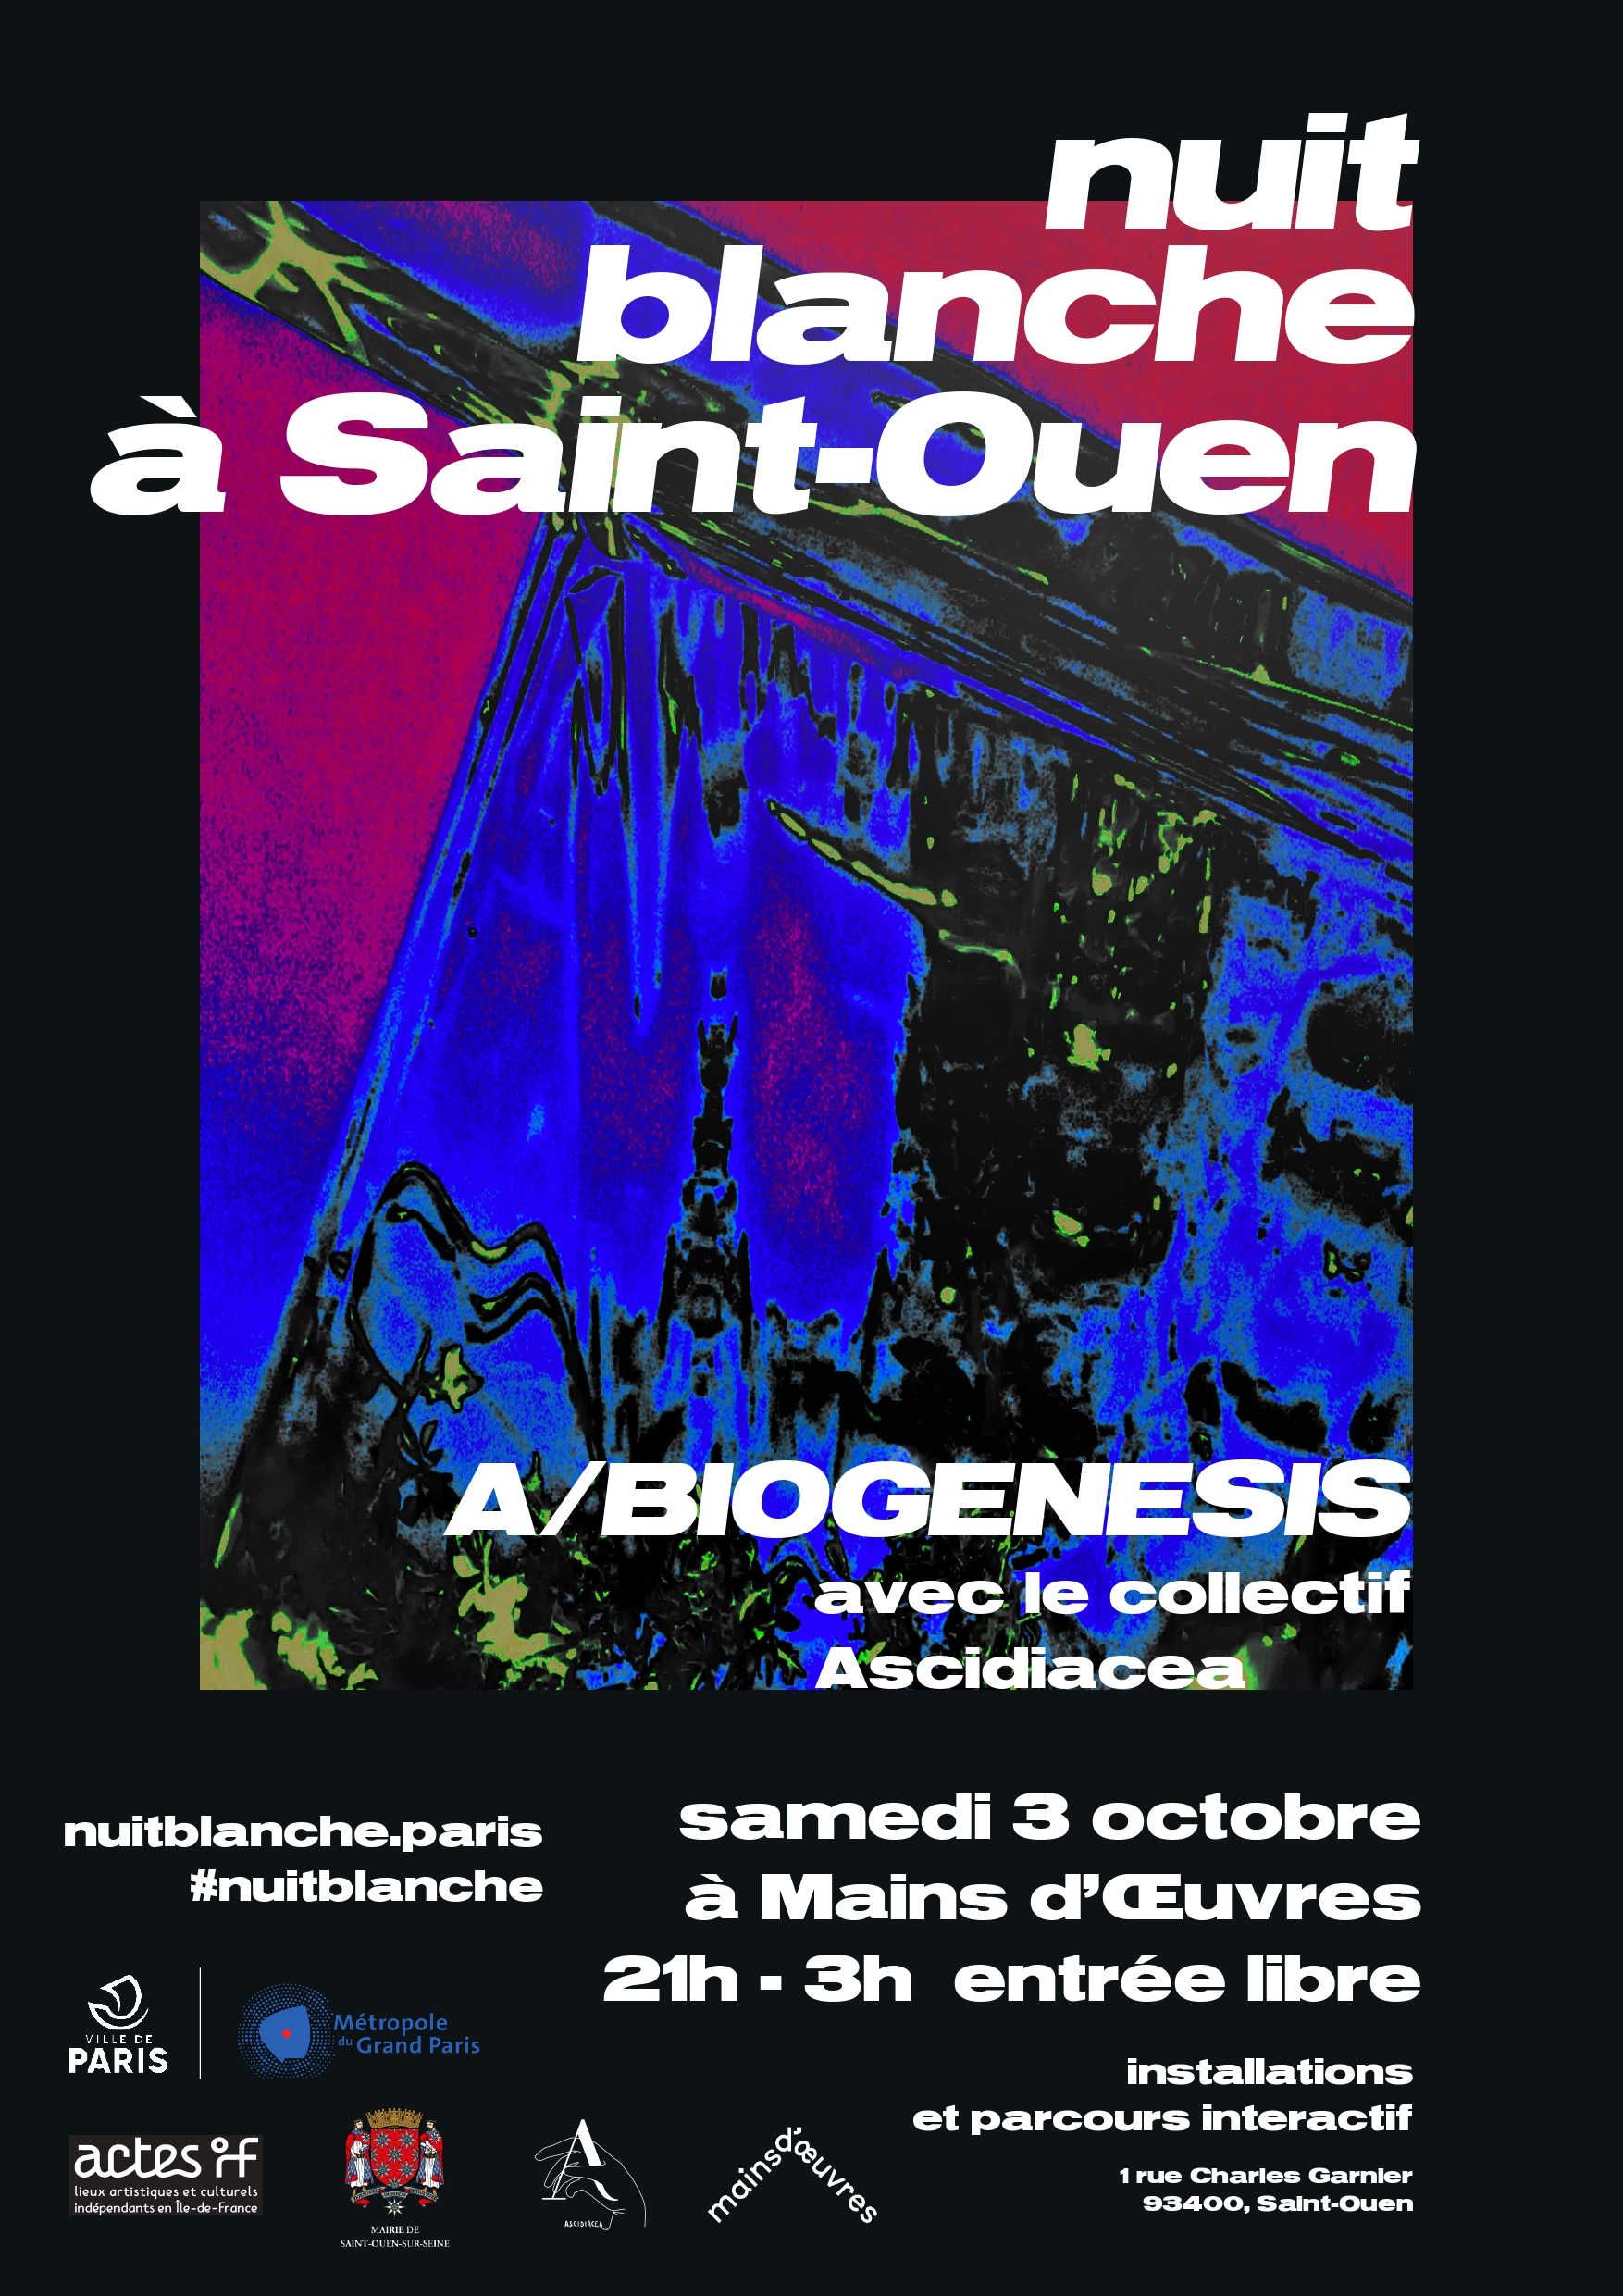 A/BIOGENESIS, Nuit Blanche @ Mains d'Oeuvres